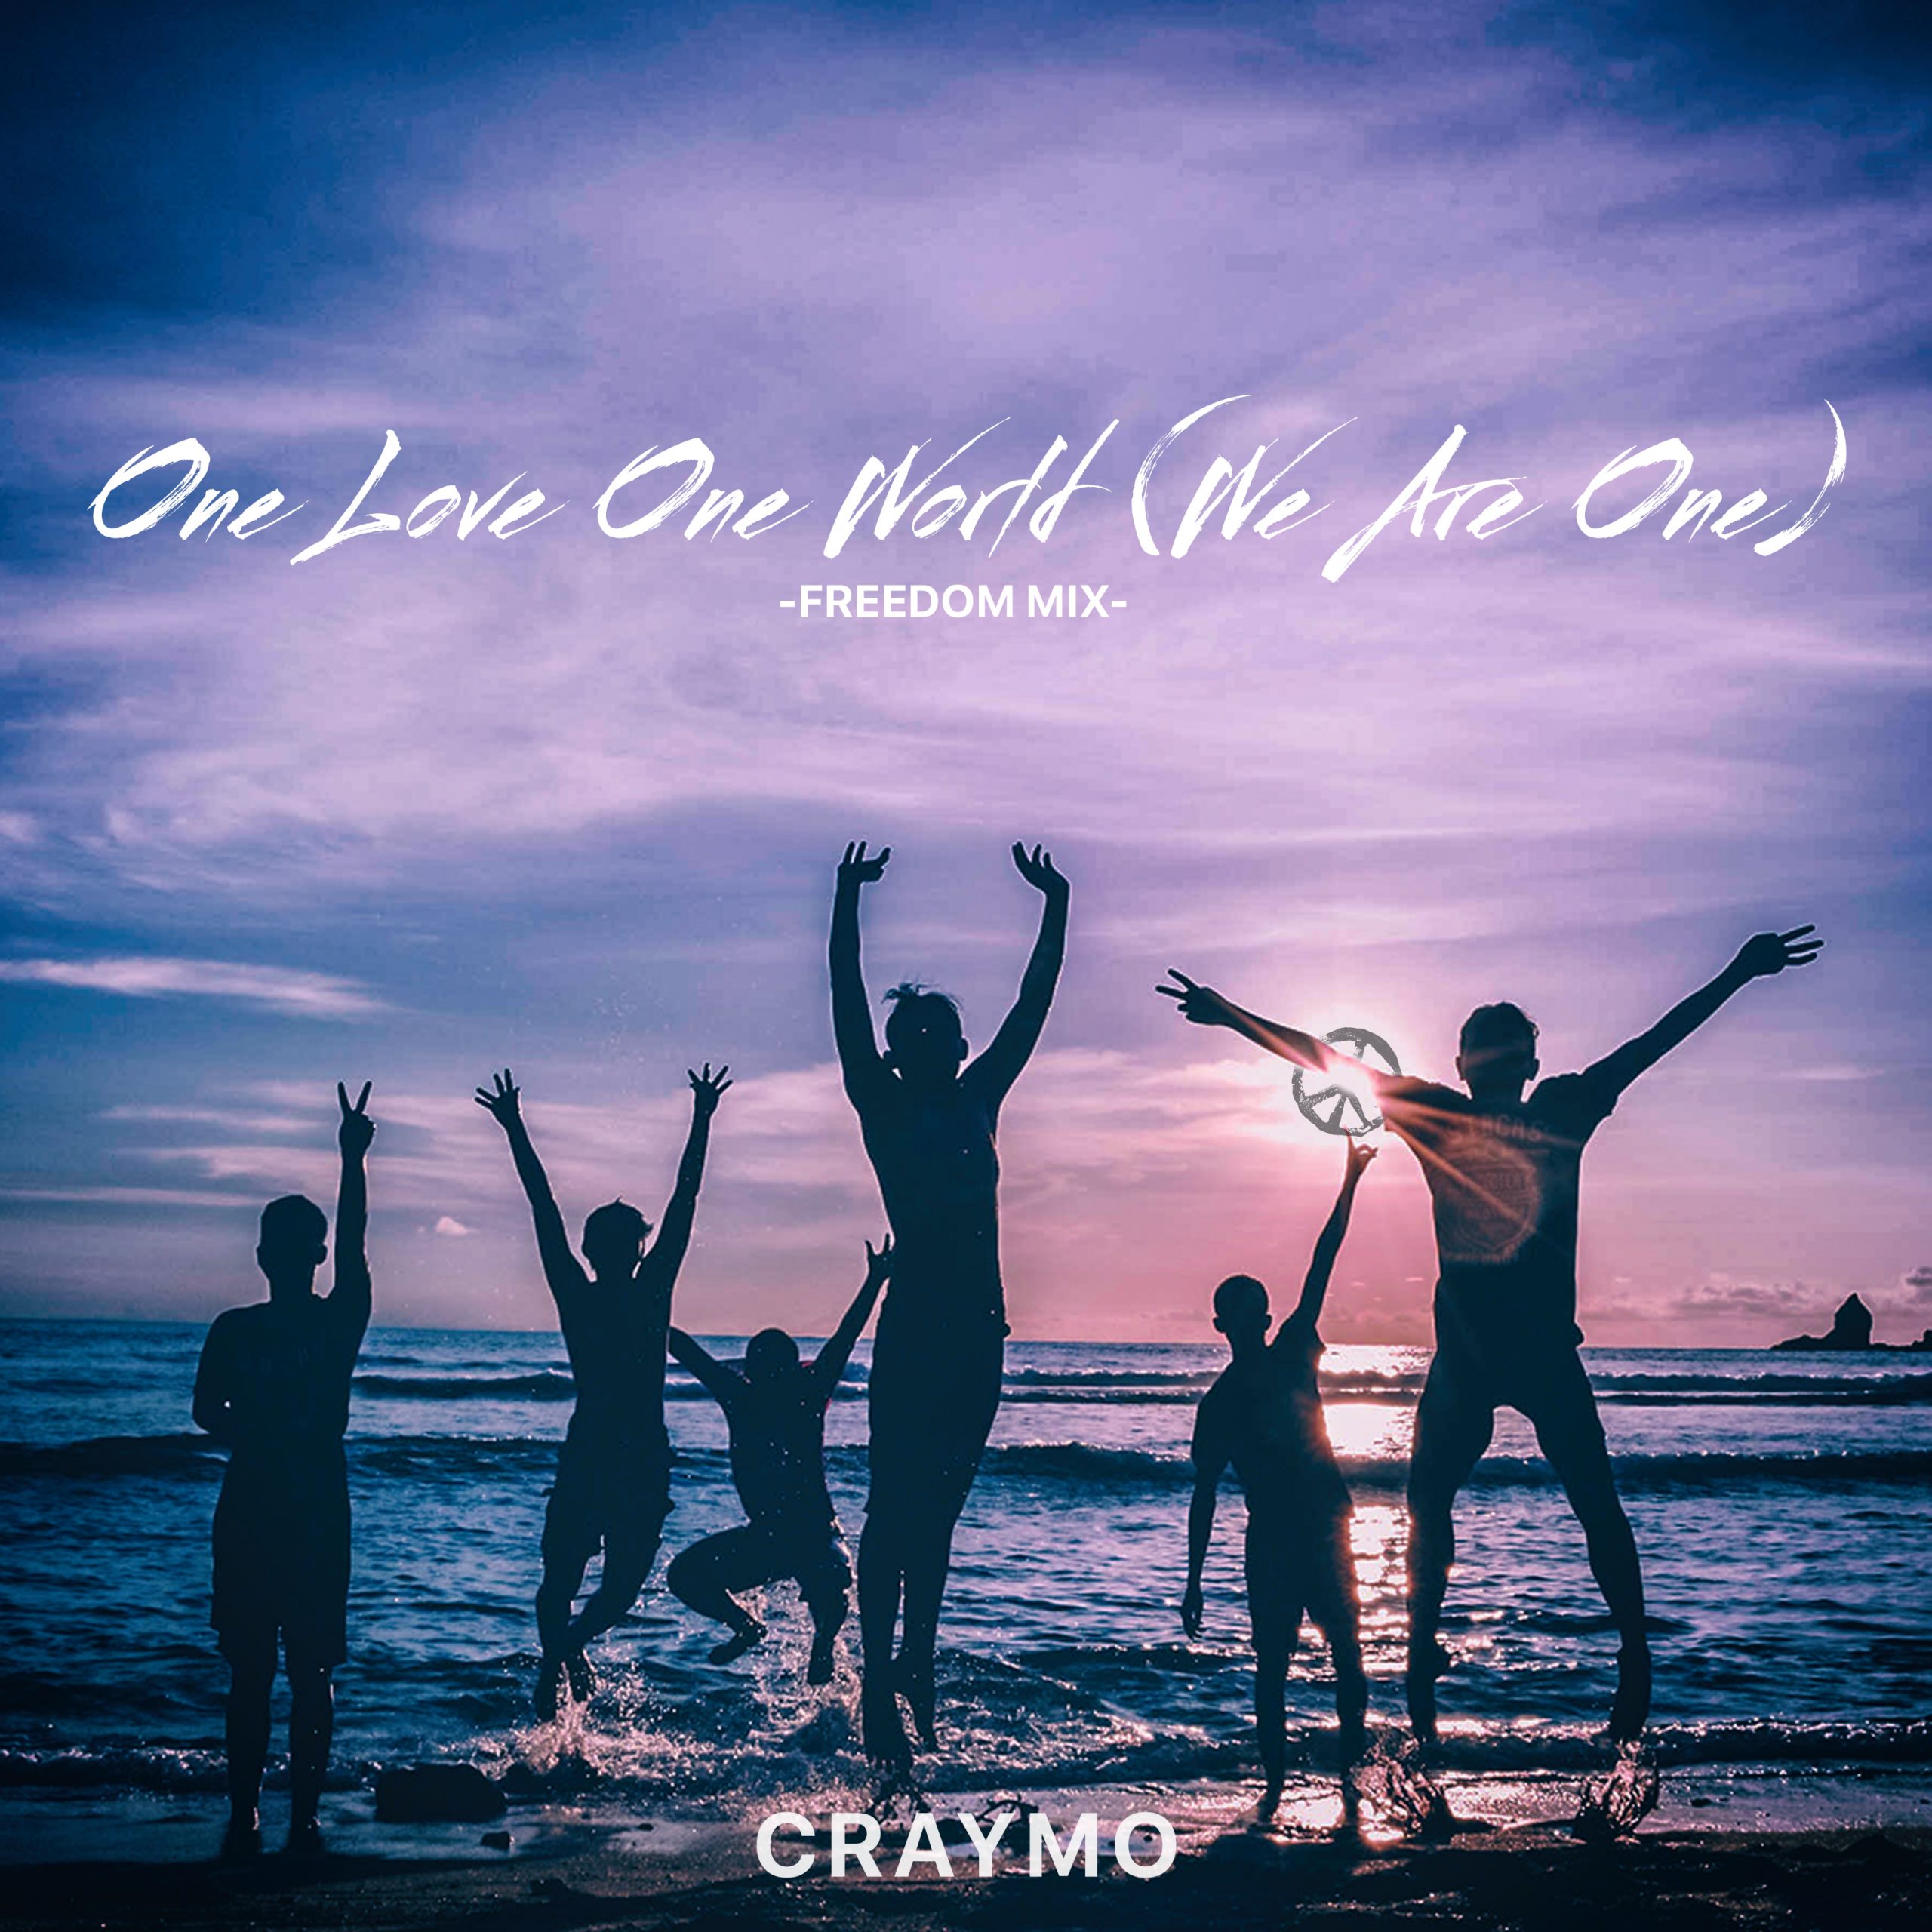 ‘One Love One World (We Are One) from ‘Craymo’ is an award-winning song that was performed by children across schools around the world.